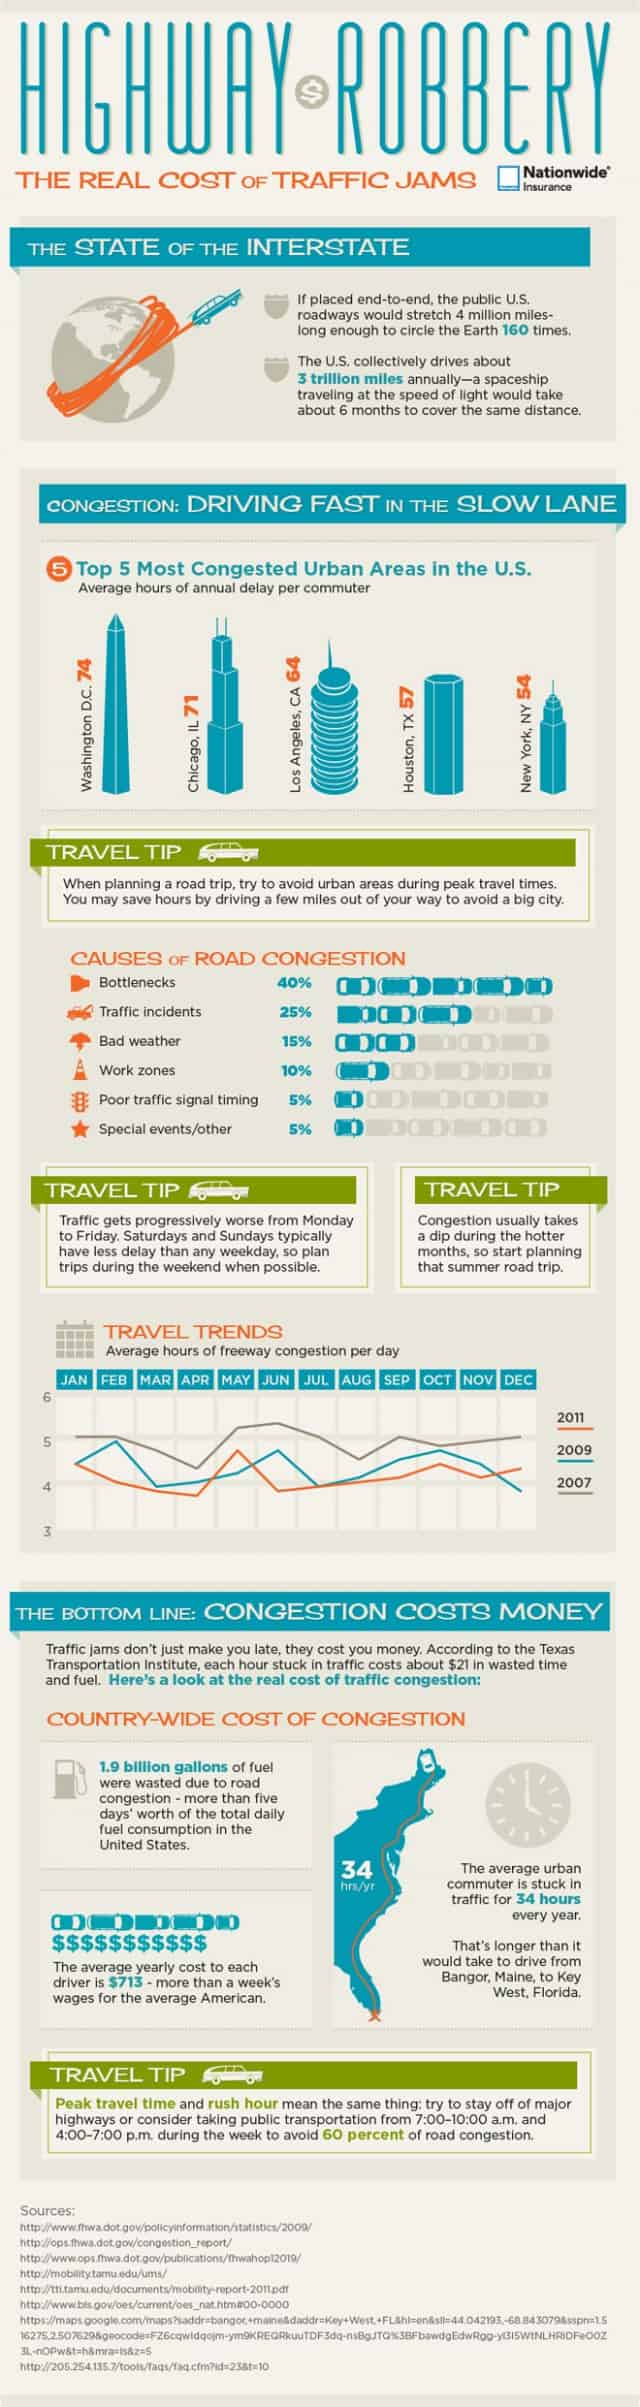 Real Cost of Traffic Jams